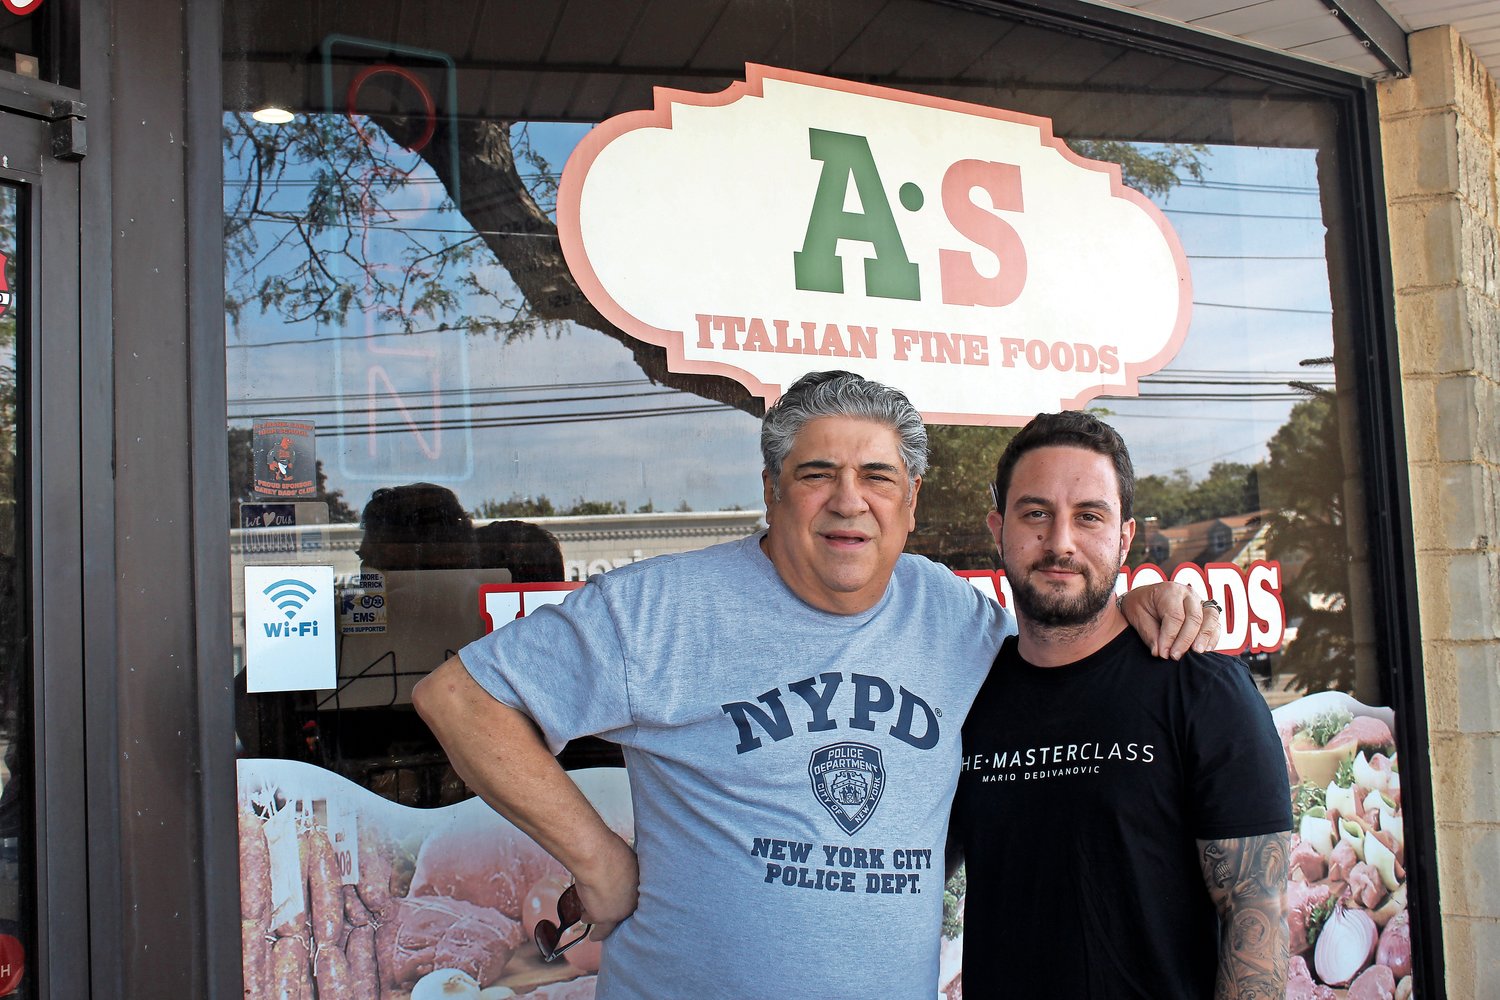 “Sopranos” star Vincent Pastore, left, joined Anthony Giordano, the owner of A&S Fine Foods in Merrick, to promote their new tomato sauce, which will be sold at the store starting next month.